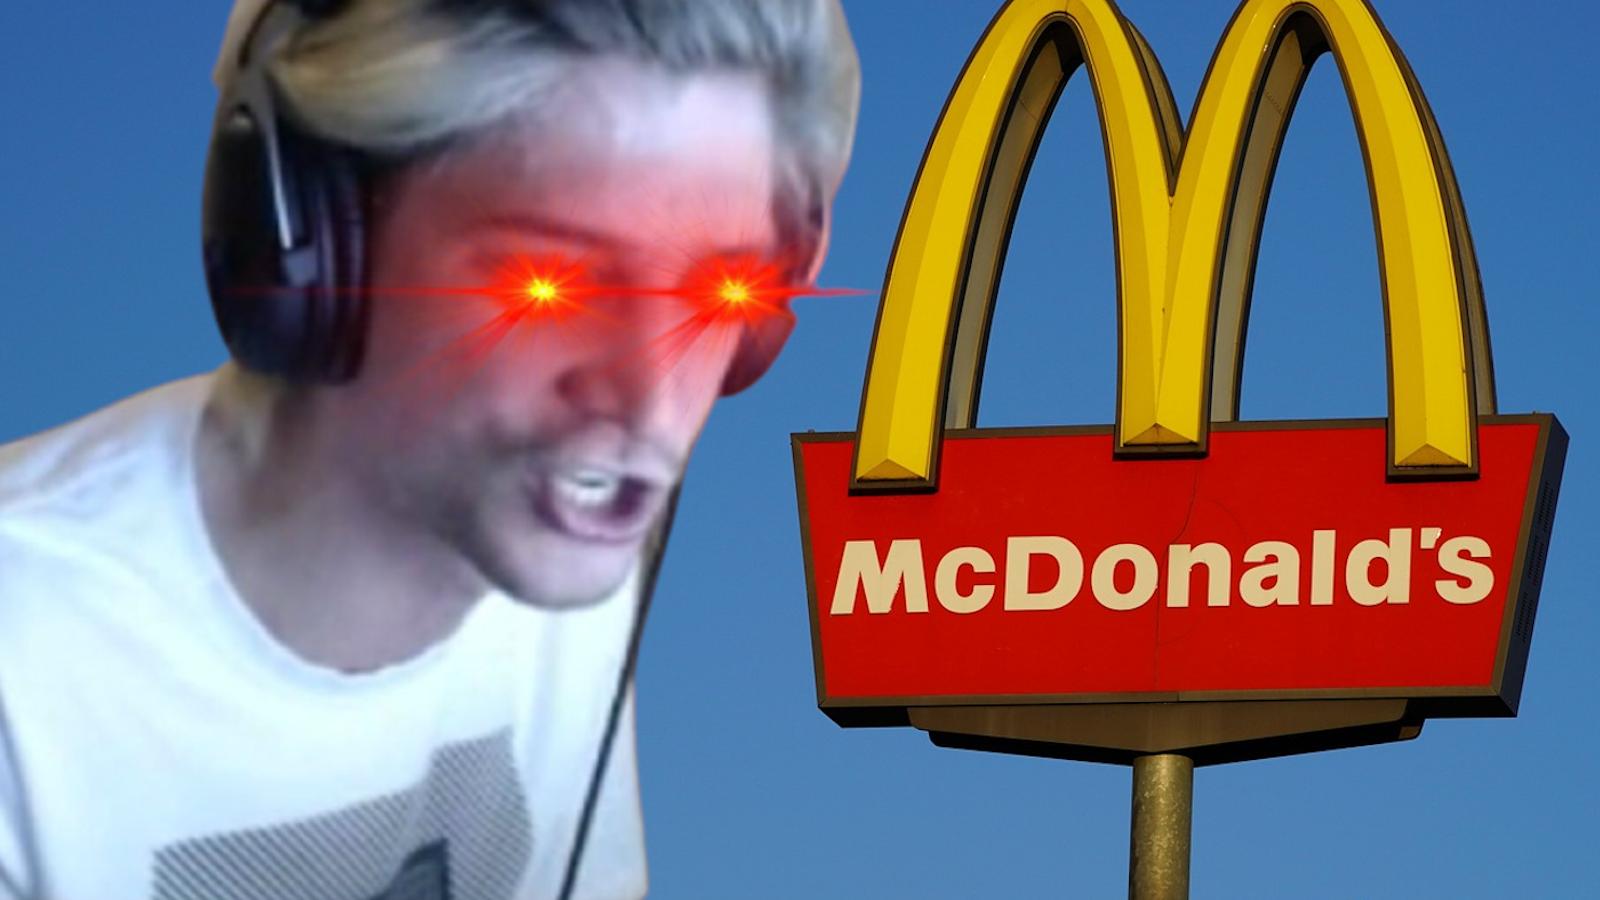 xqc complains to mcdonald's about honey mustard